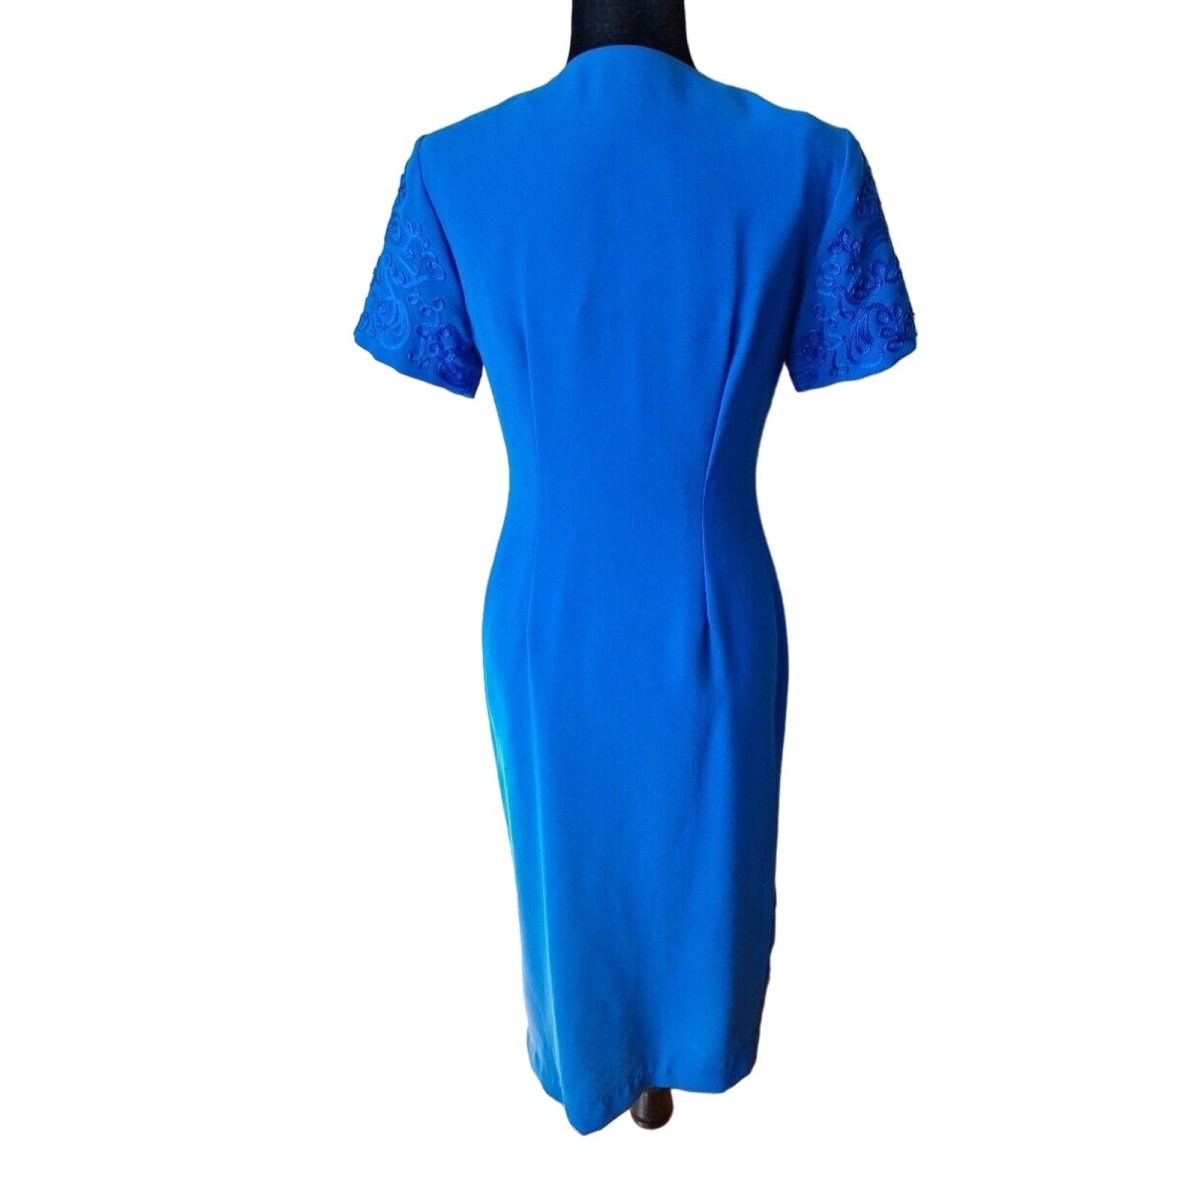 Vintage 90s does 40s Bright Blue Button Front Wiggle Dress Women Size 4/6 - themallvintage The Mall Vintage